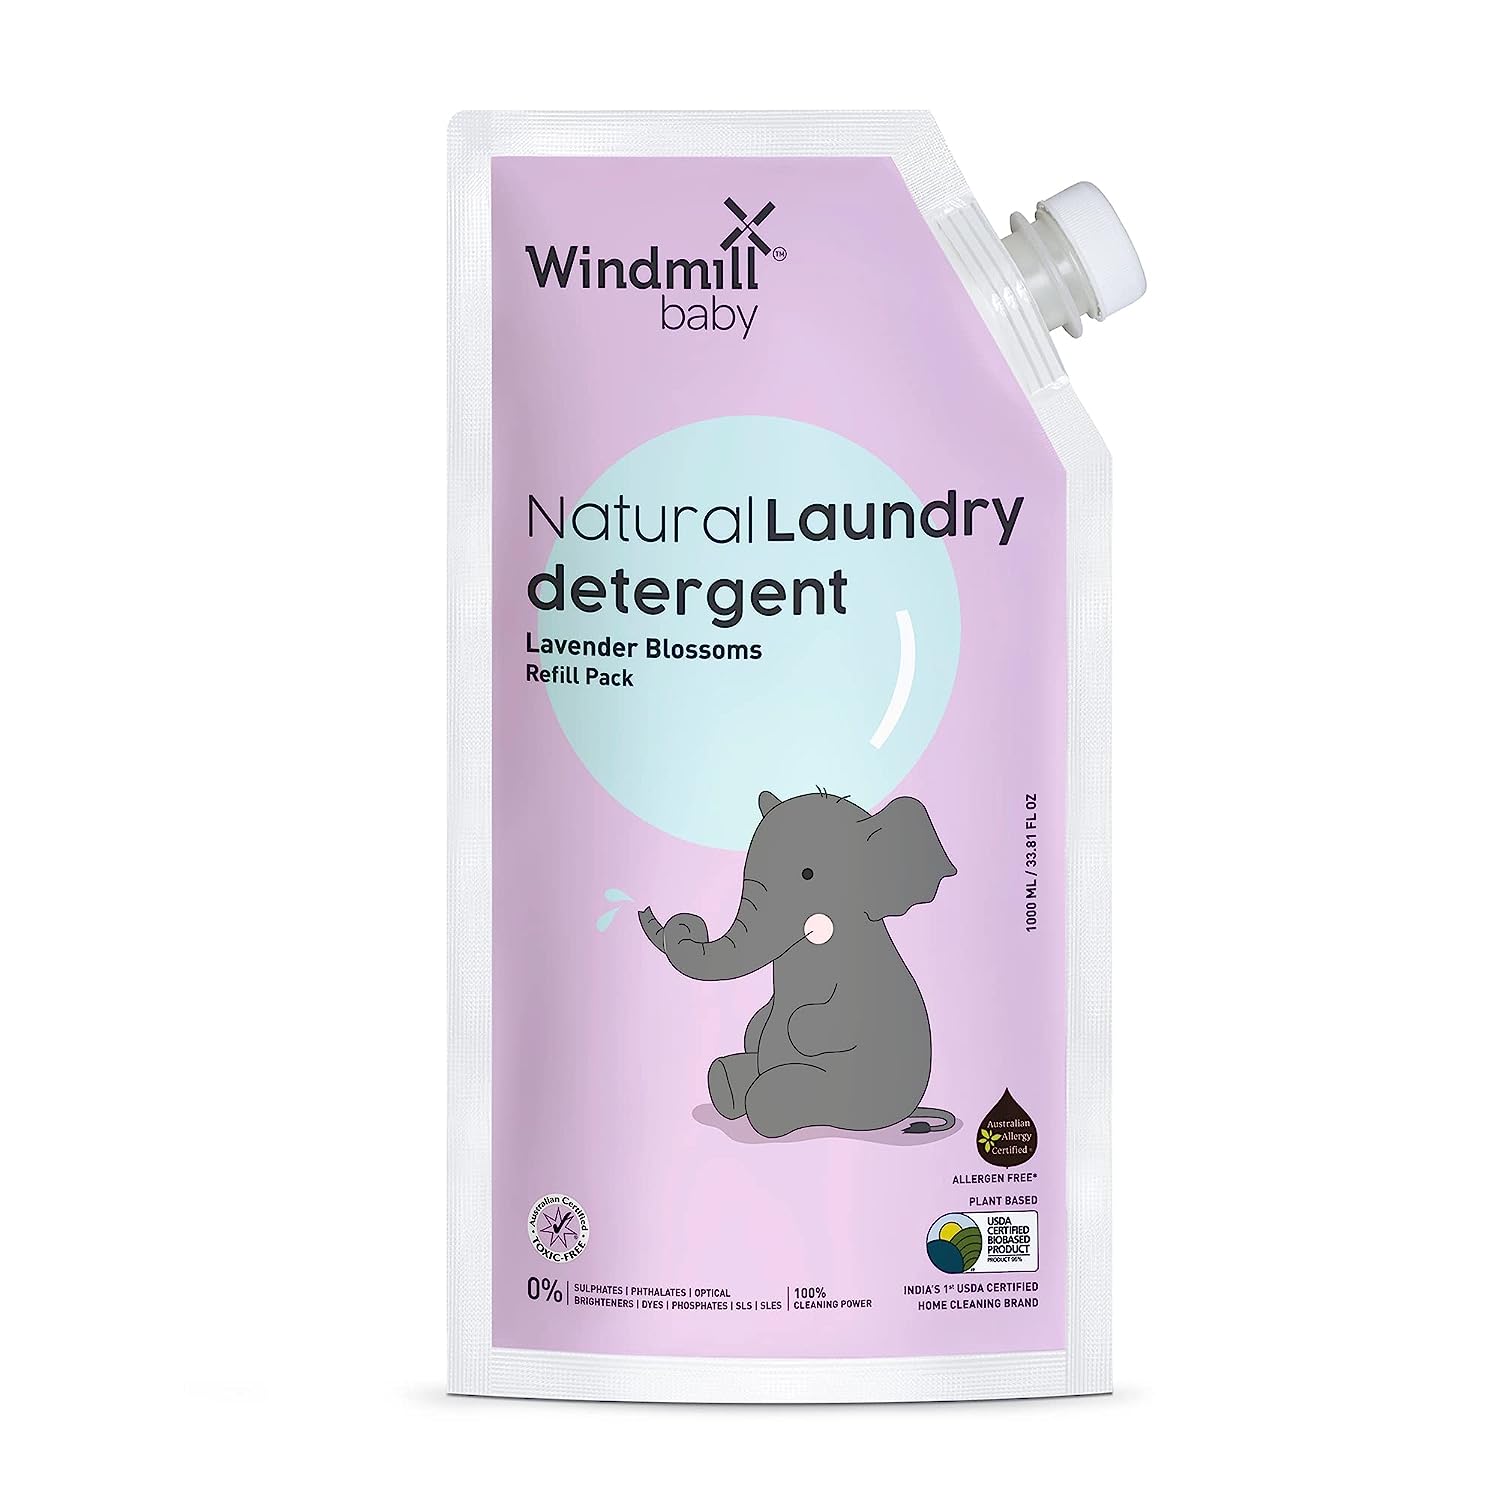 Windmill baby Natural Plant Based Laundry Detergent